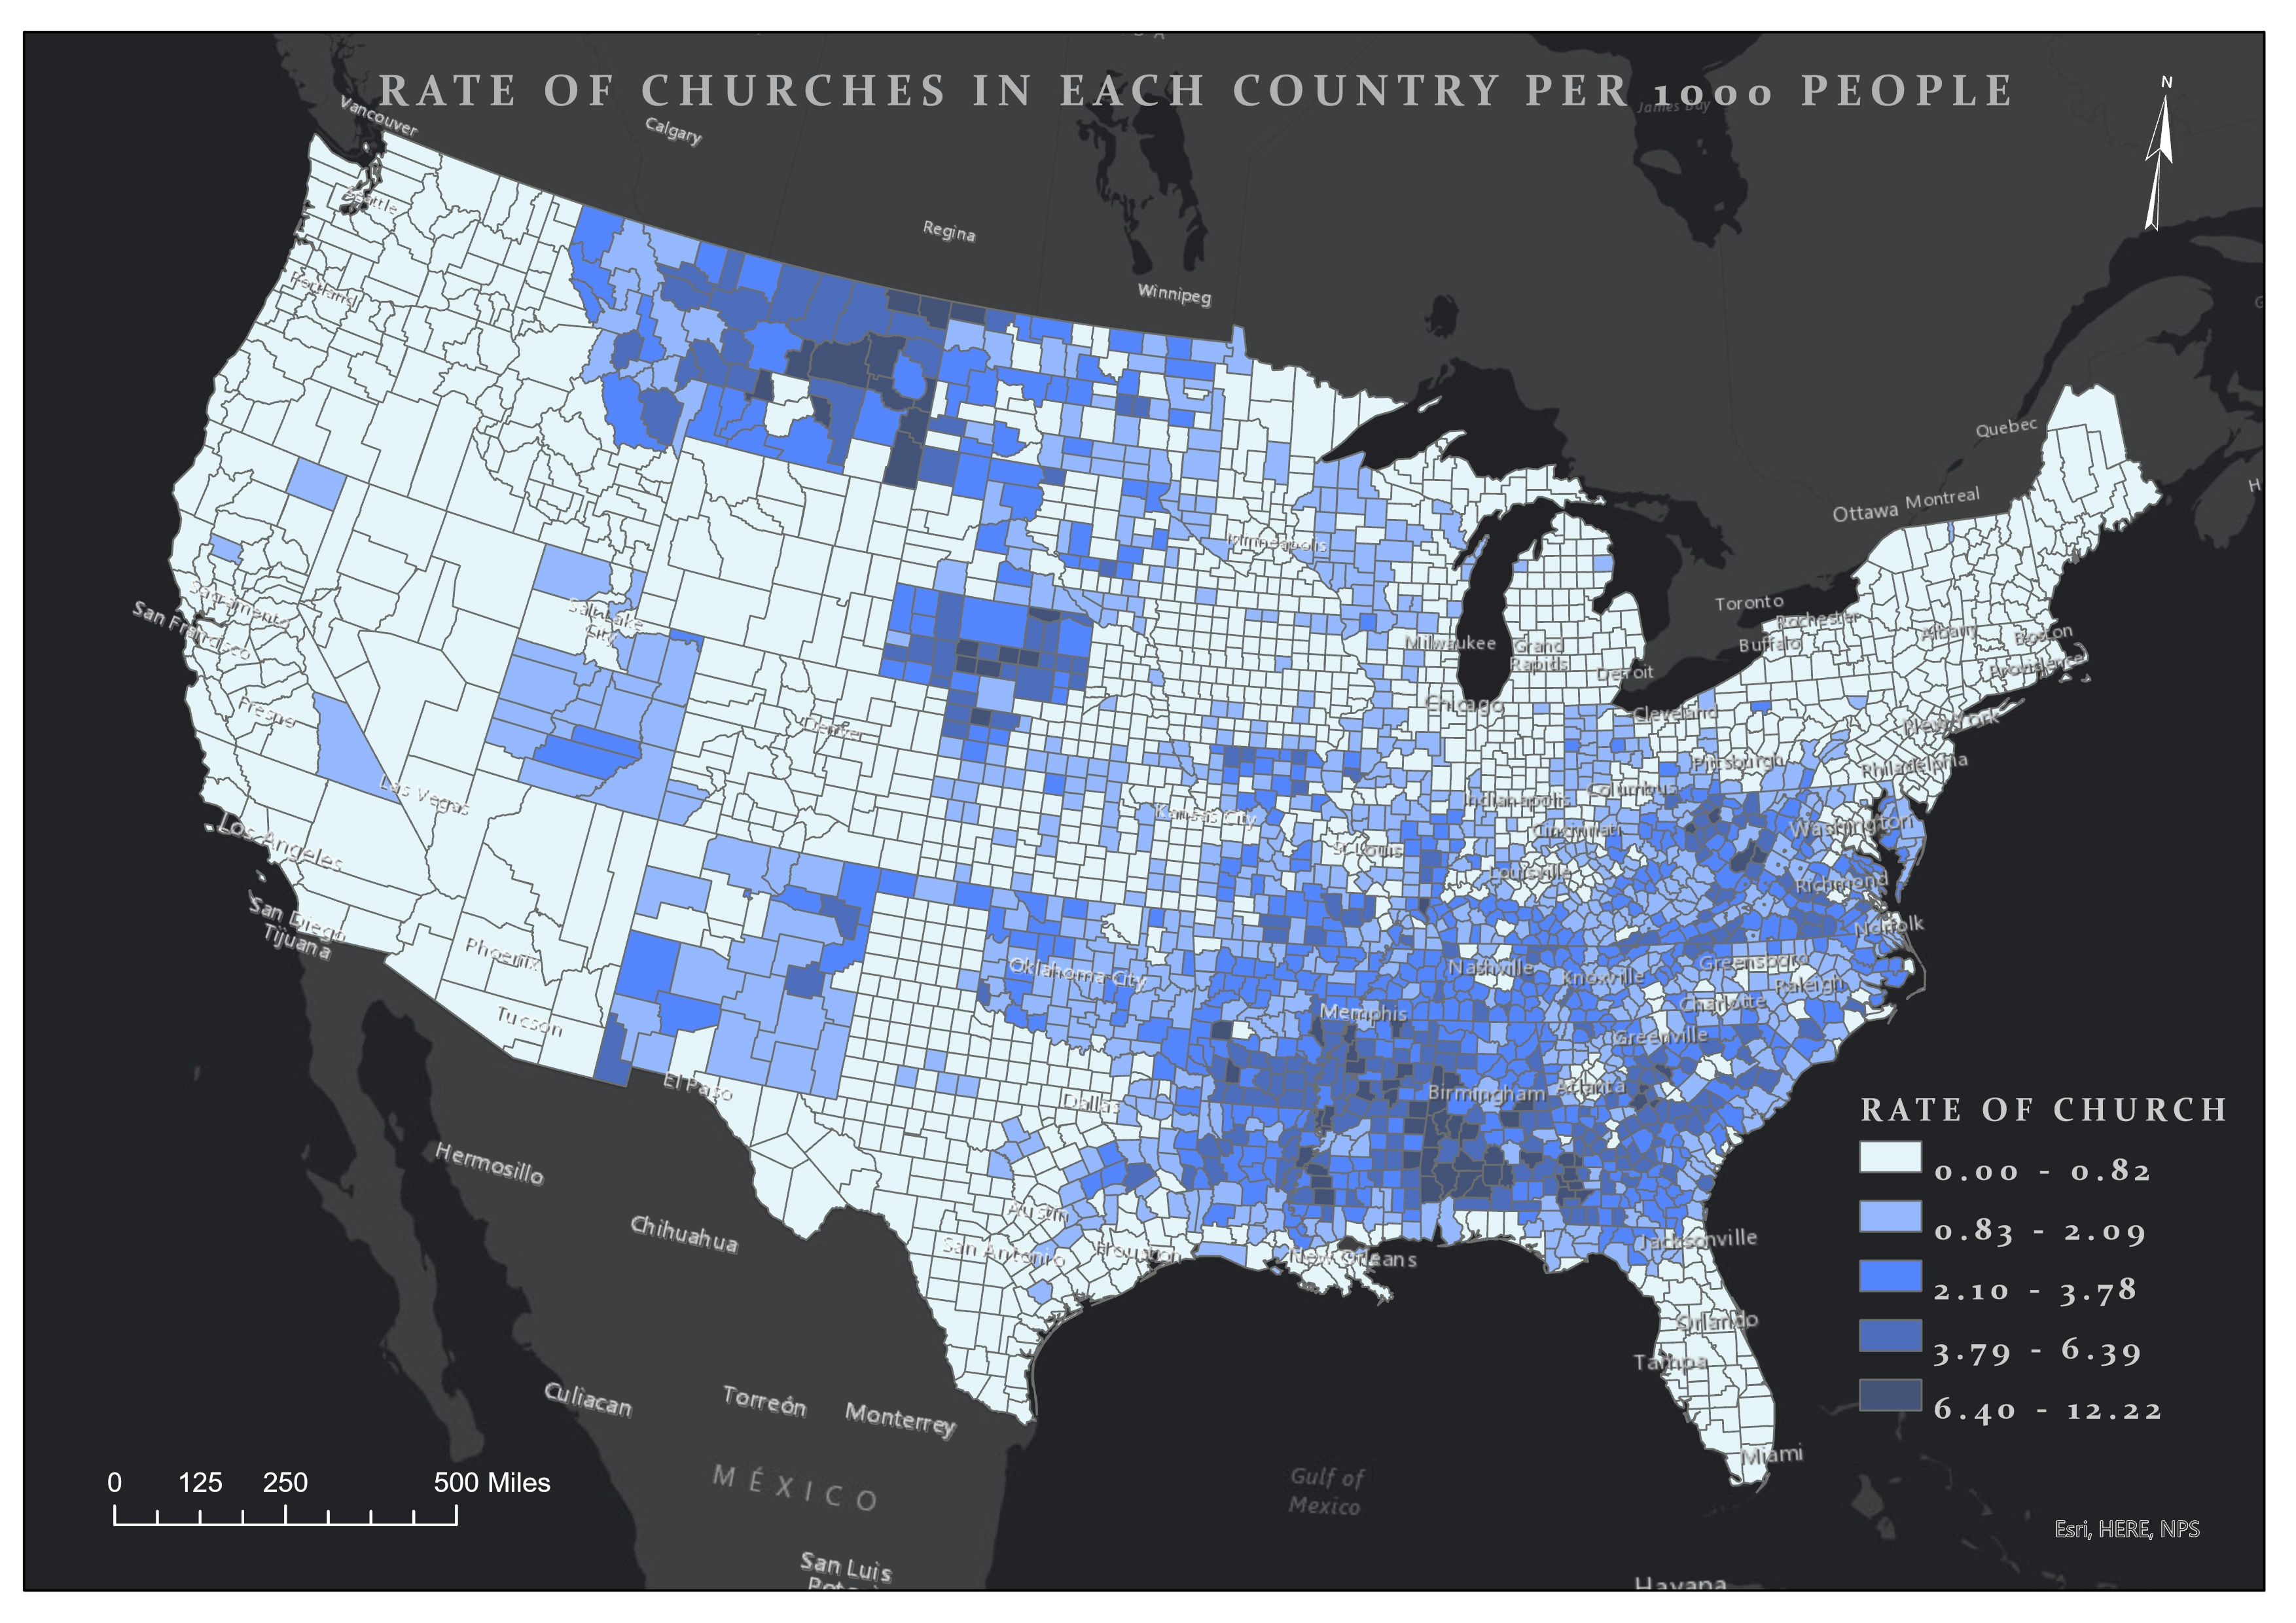 Distribution of Churches in U.S.